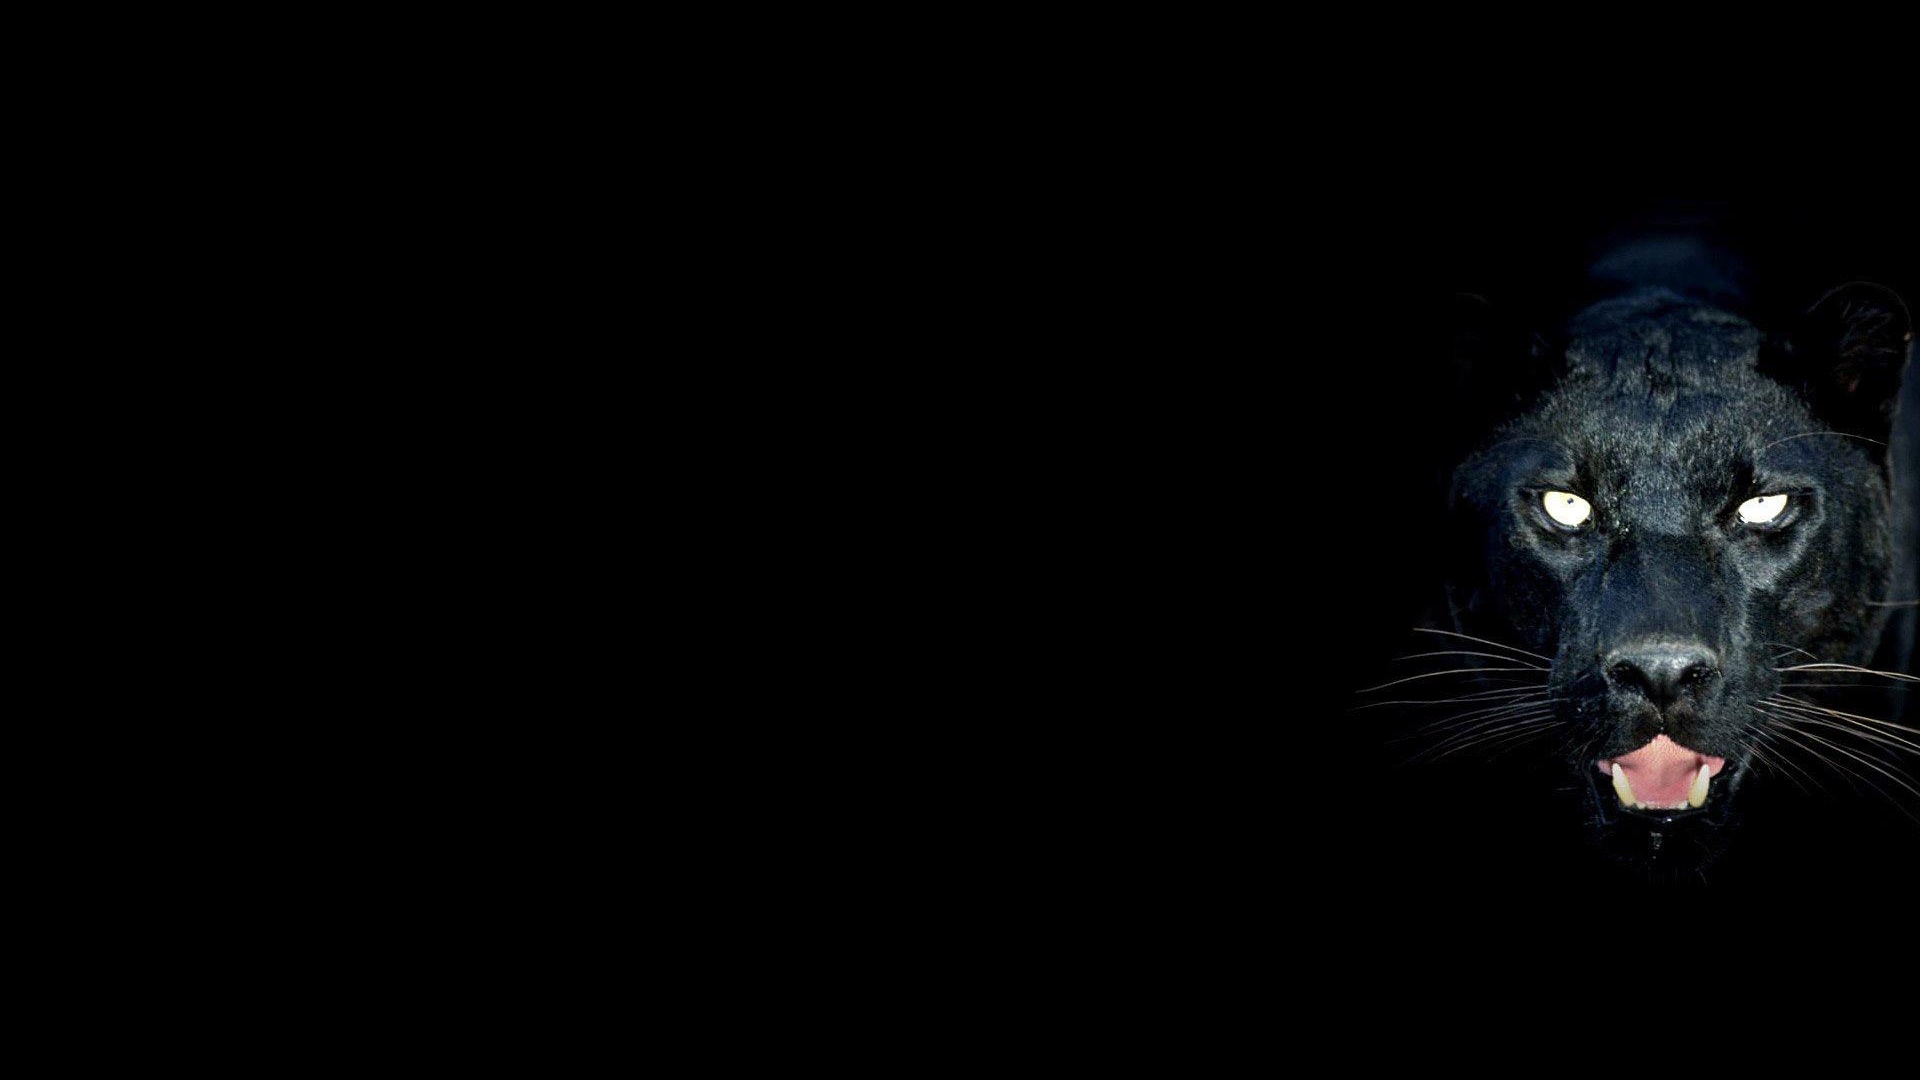 Black Panther Wallpaper With Blue Eyes